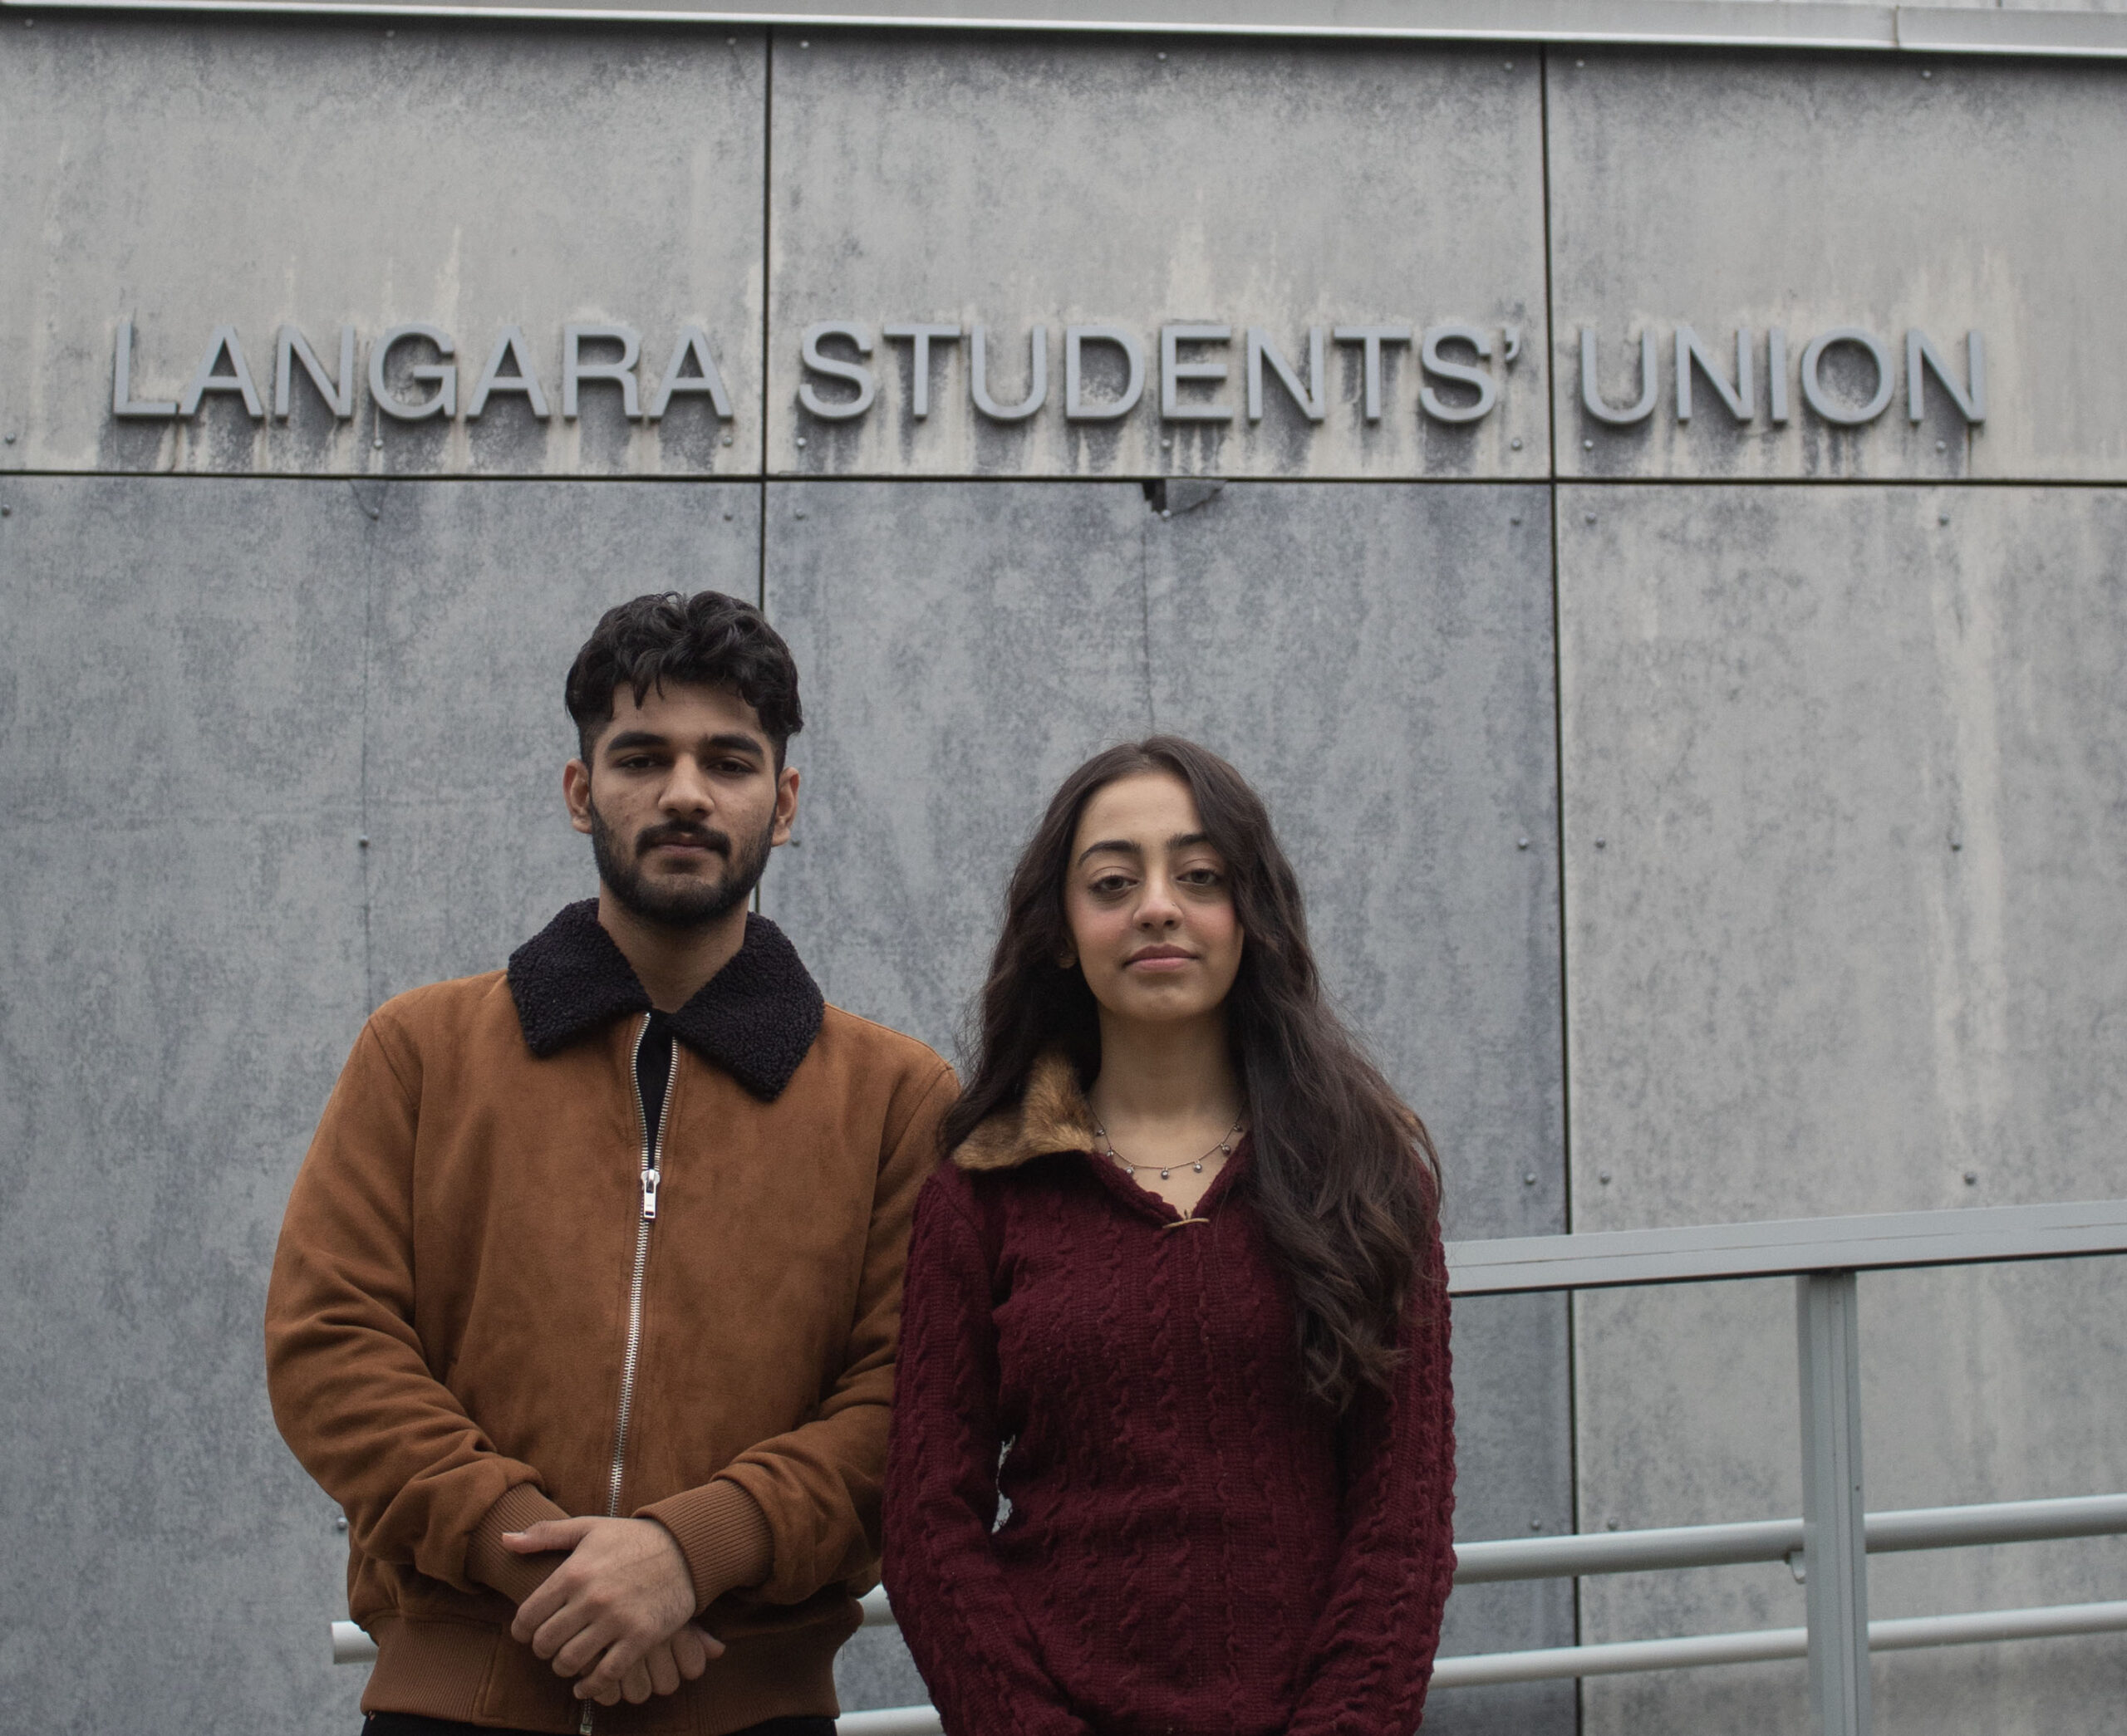 Two students standing in front of the Langara Student Union building.